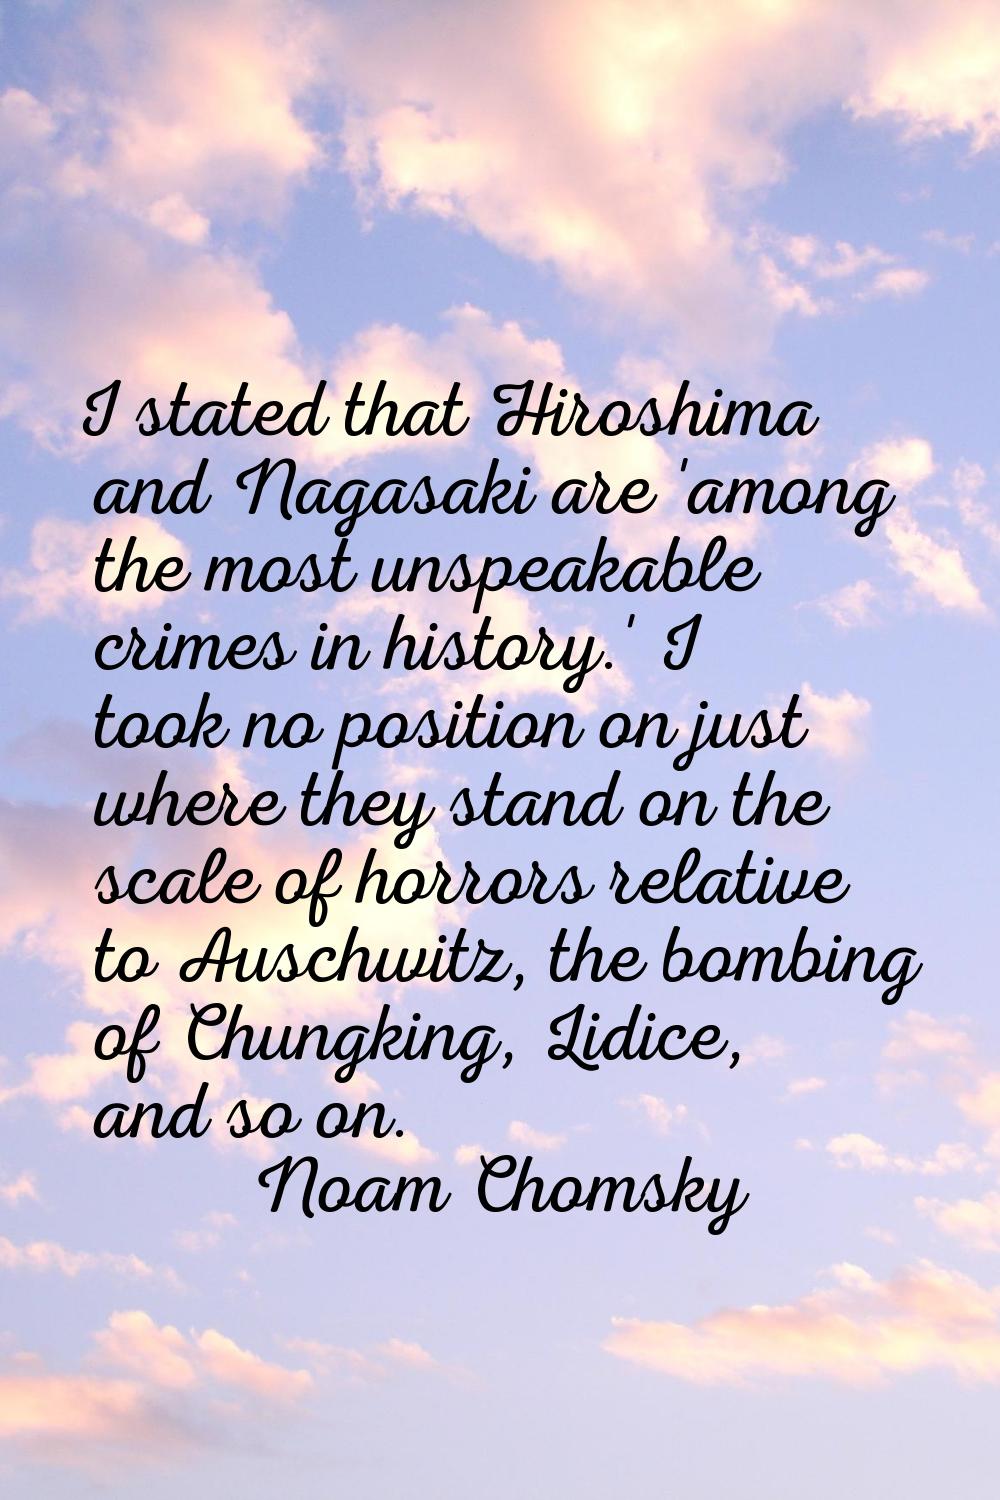 I stated that Hiroshima and Nagasaki are 'among the most unspeakable crimes in history.' I took no 